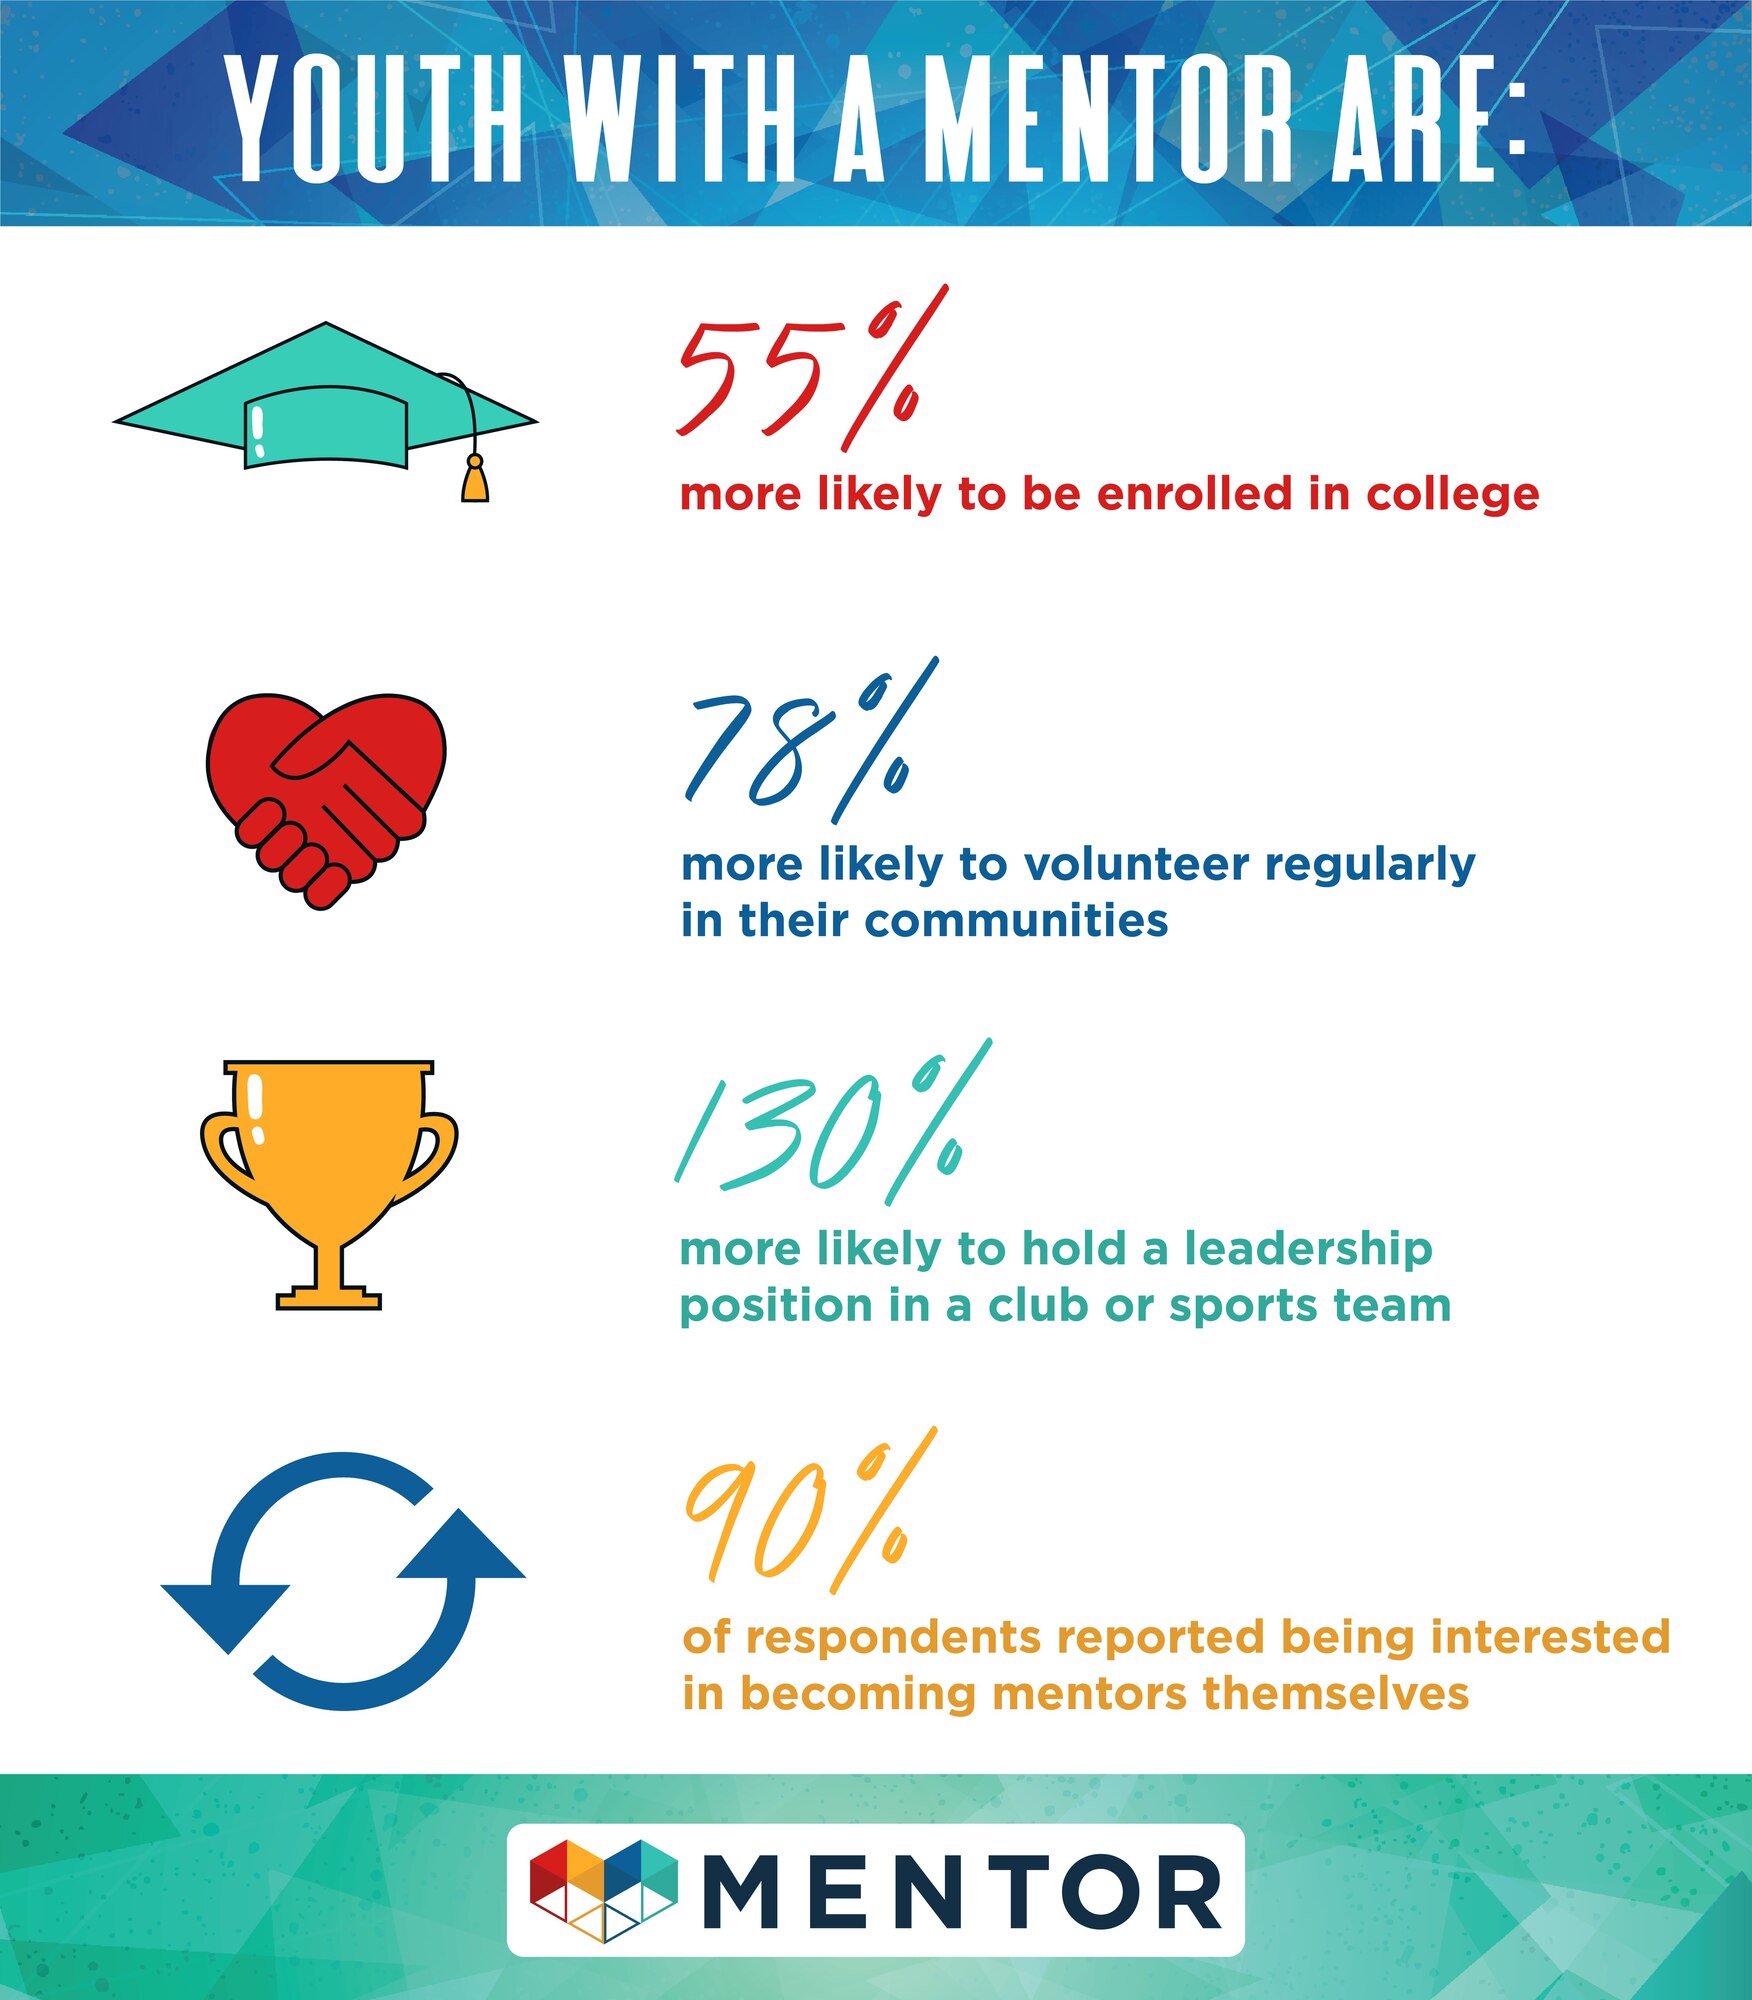 Infographic providing facts and statistics about mentoring.